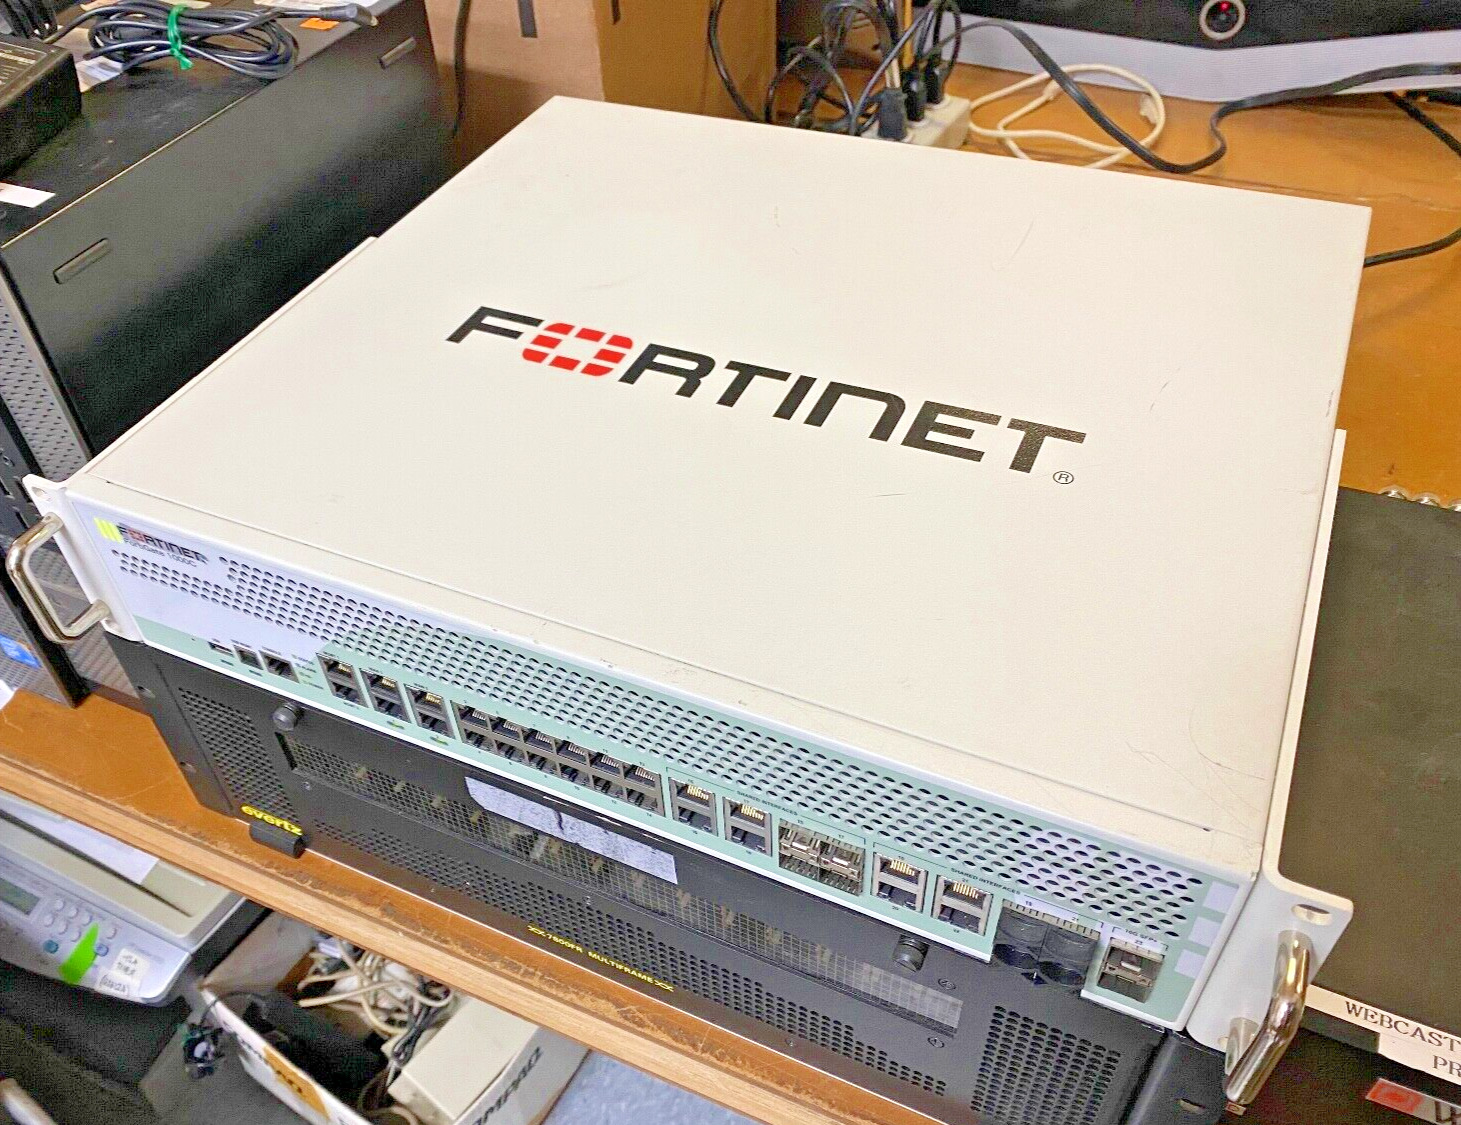 Fortinet Fortigate 1000C FG1000c Security Appliance FIREWALL Router